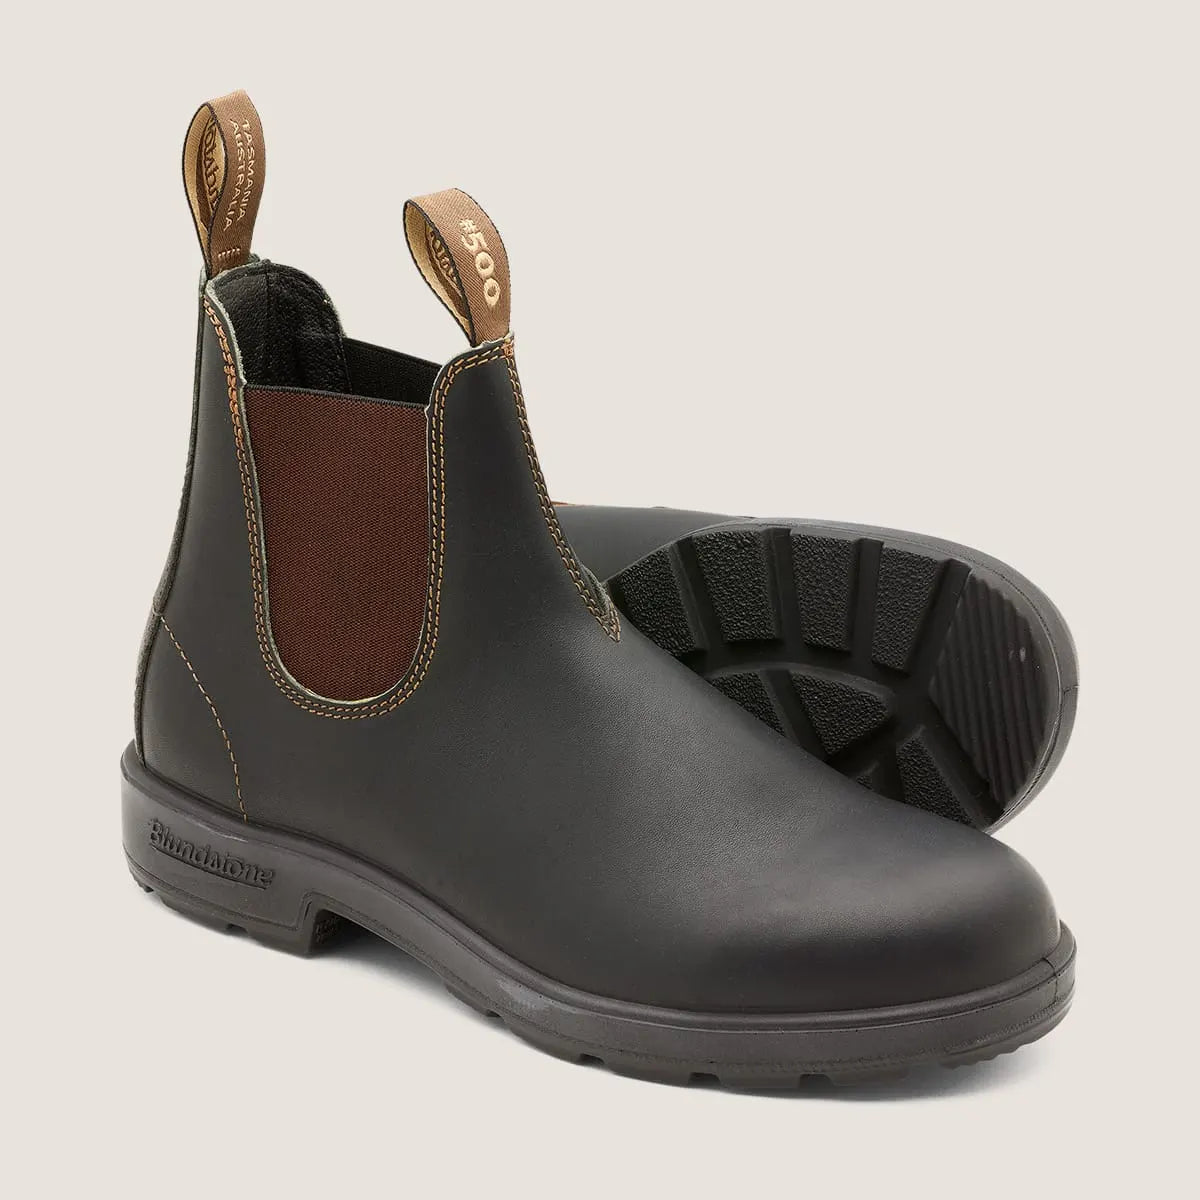 BLUNDSTONE - ELASTIC SIDED BOOT 500 - Brown